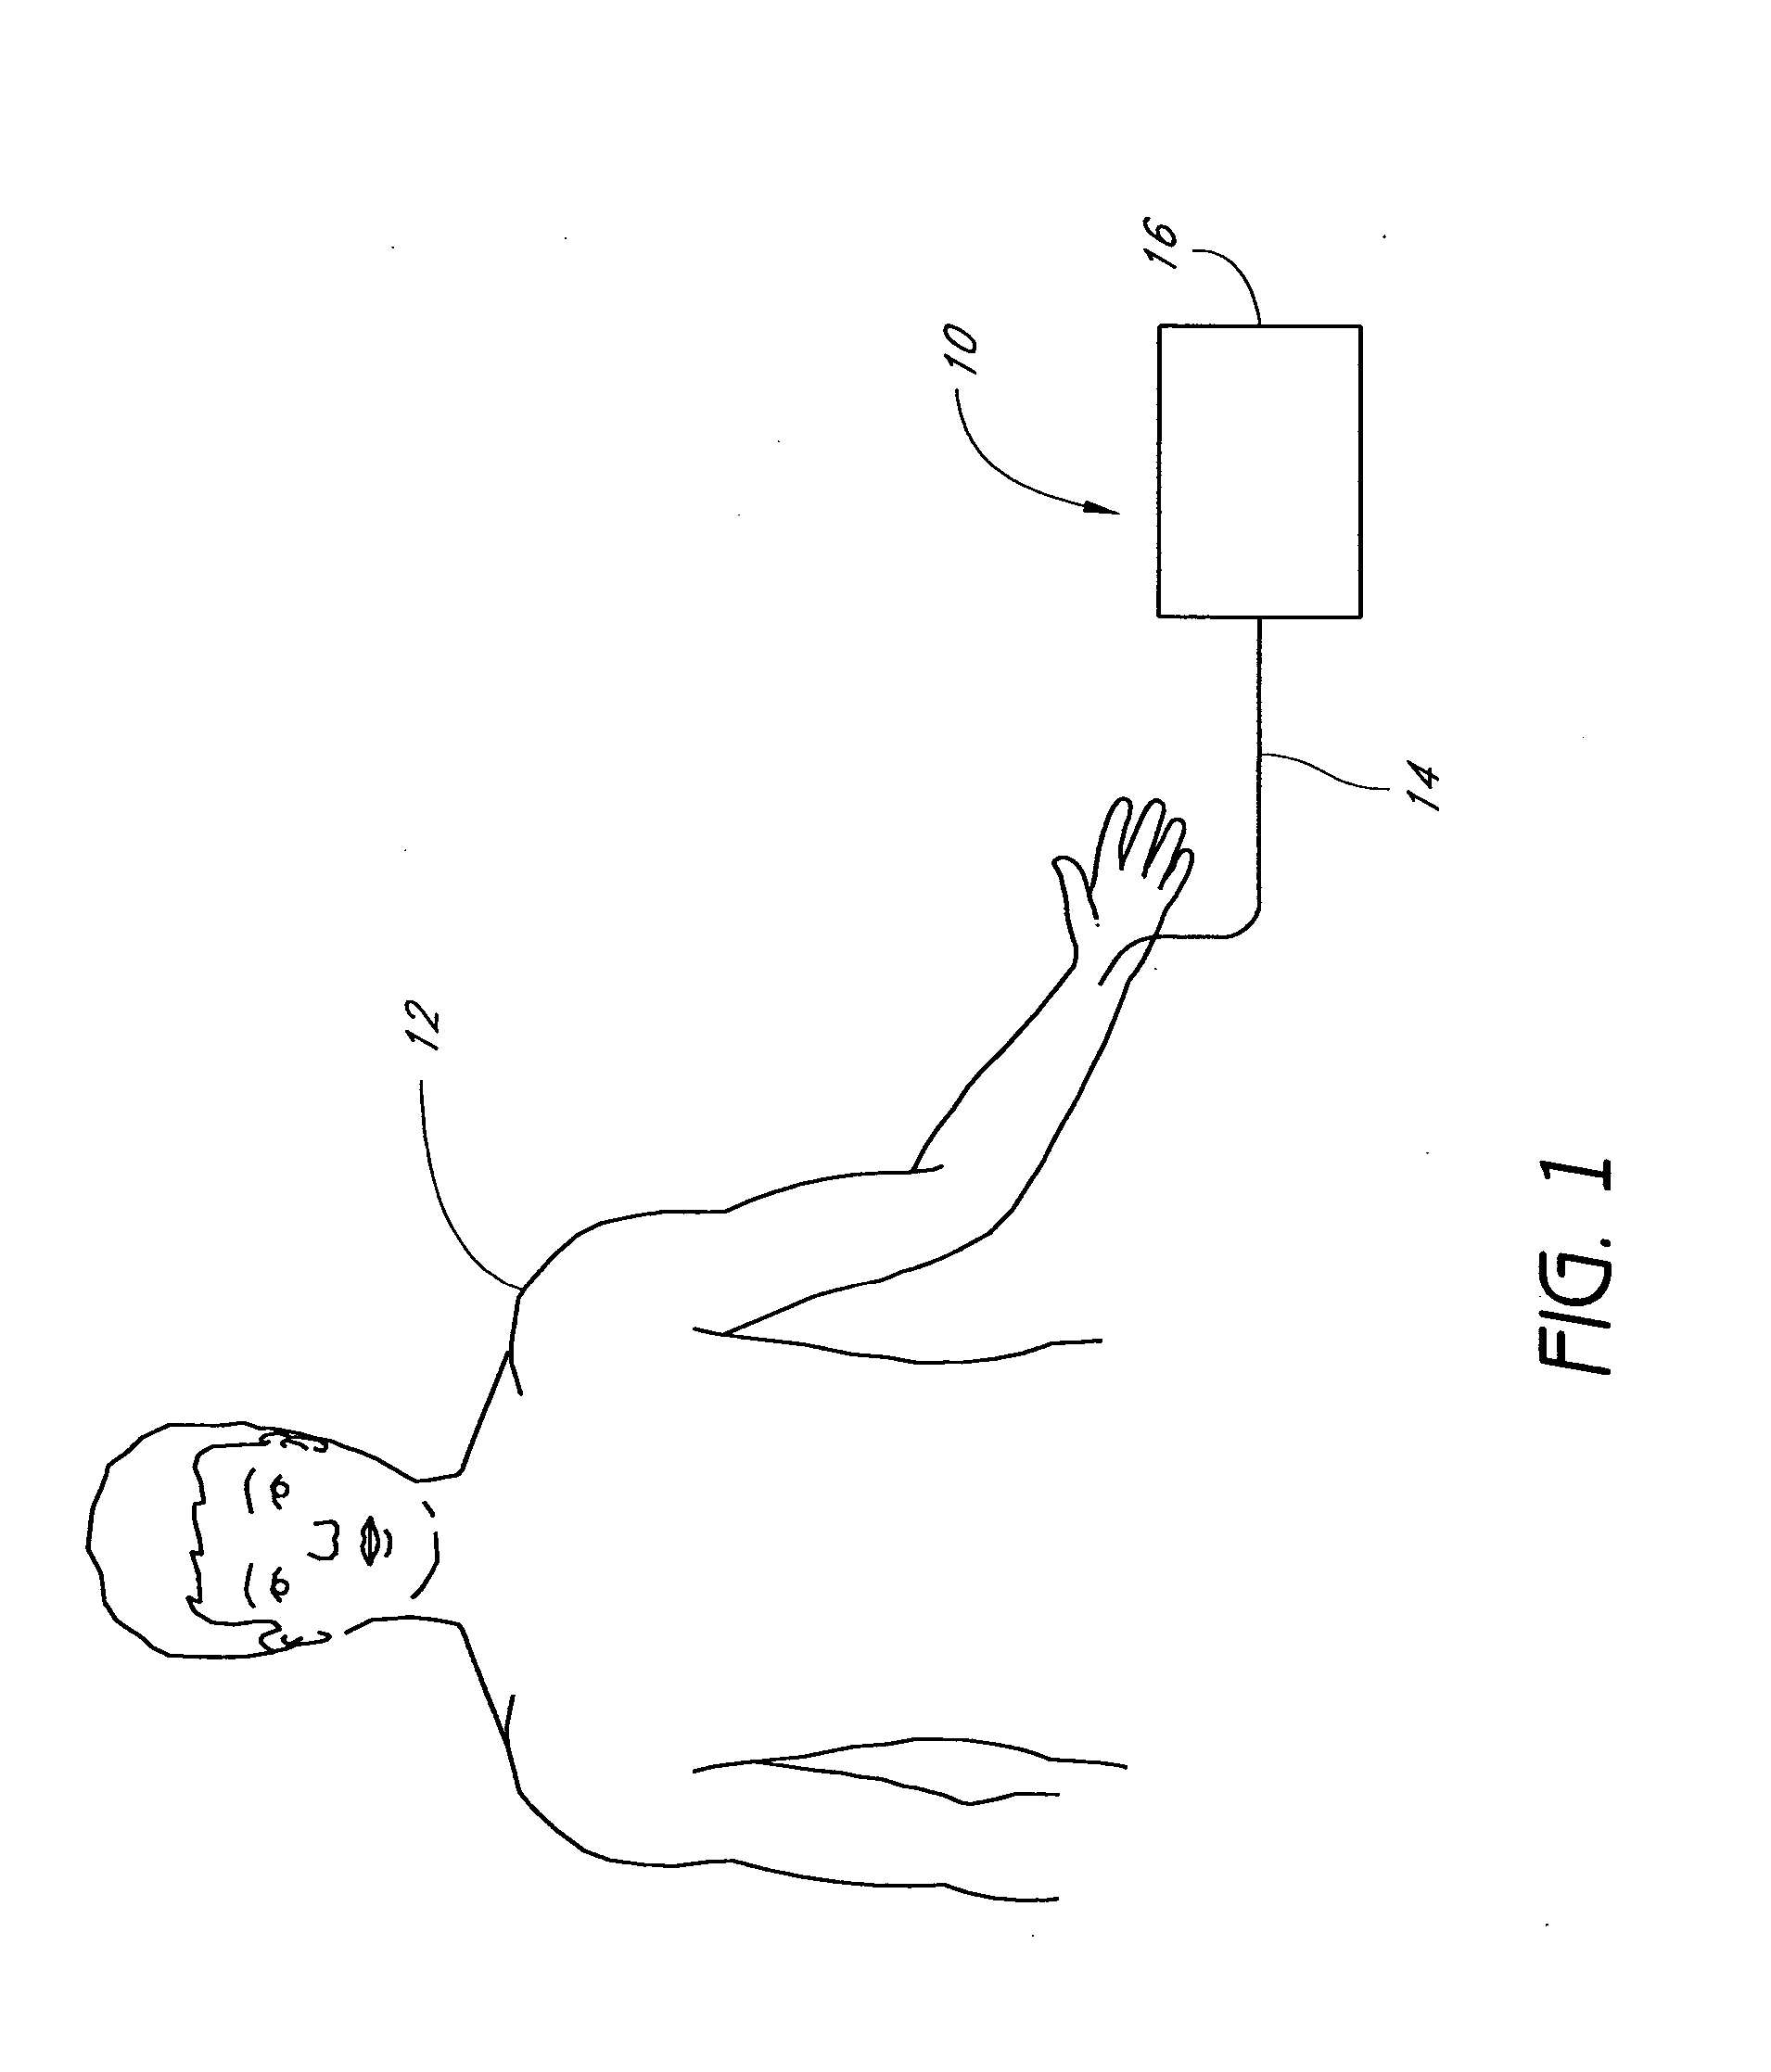 Cardiac output measurement devices and methods